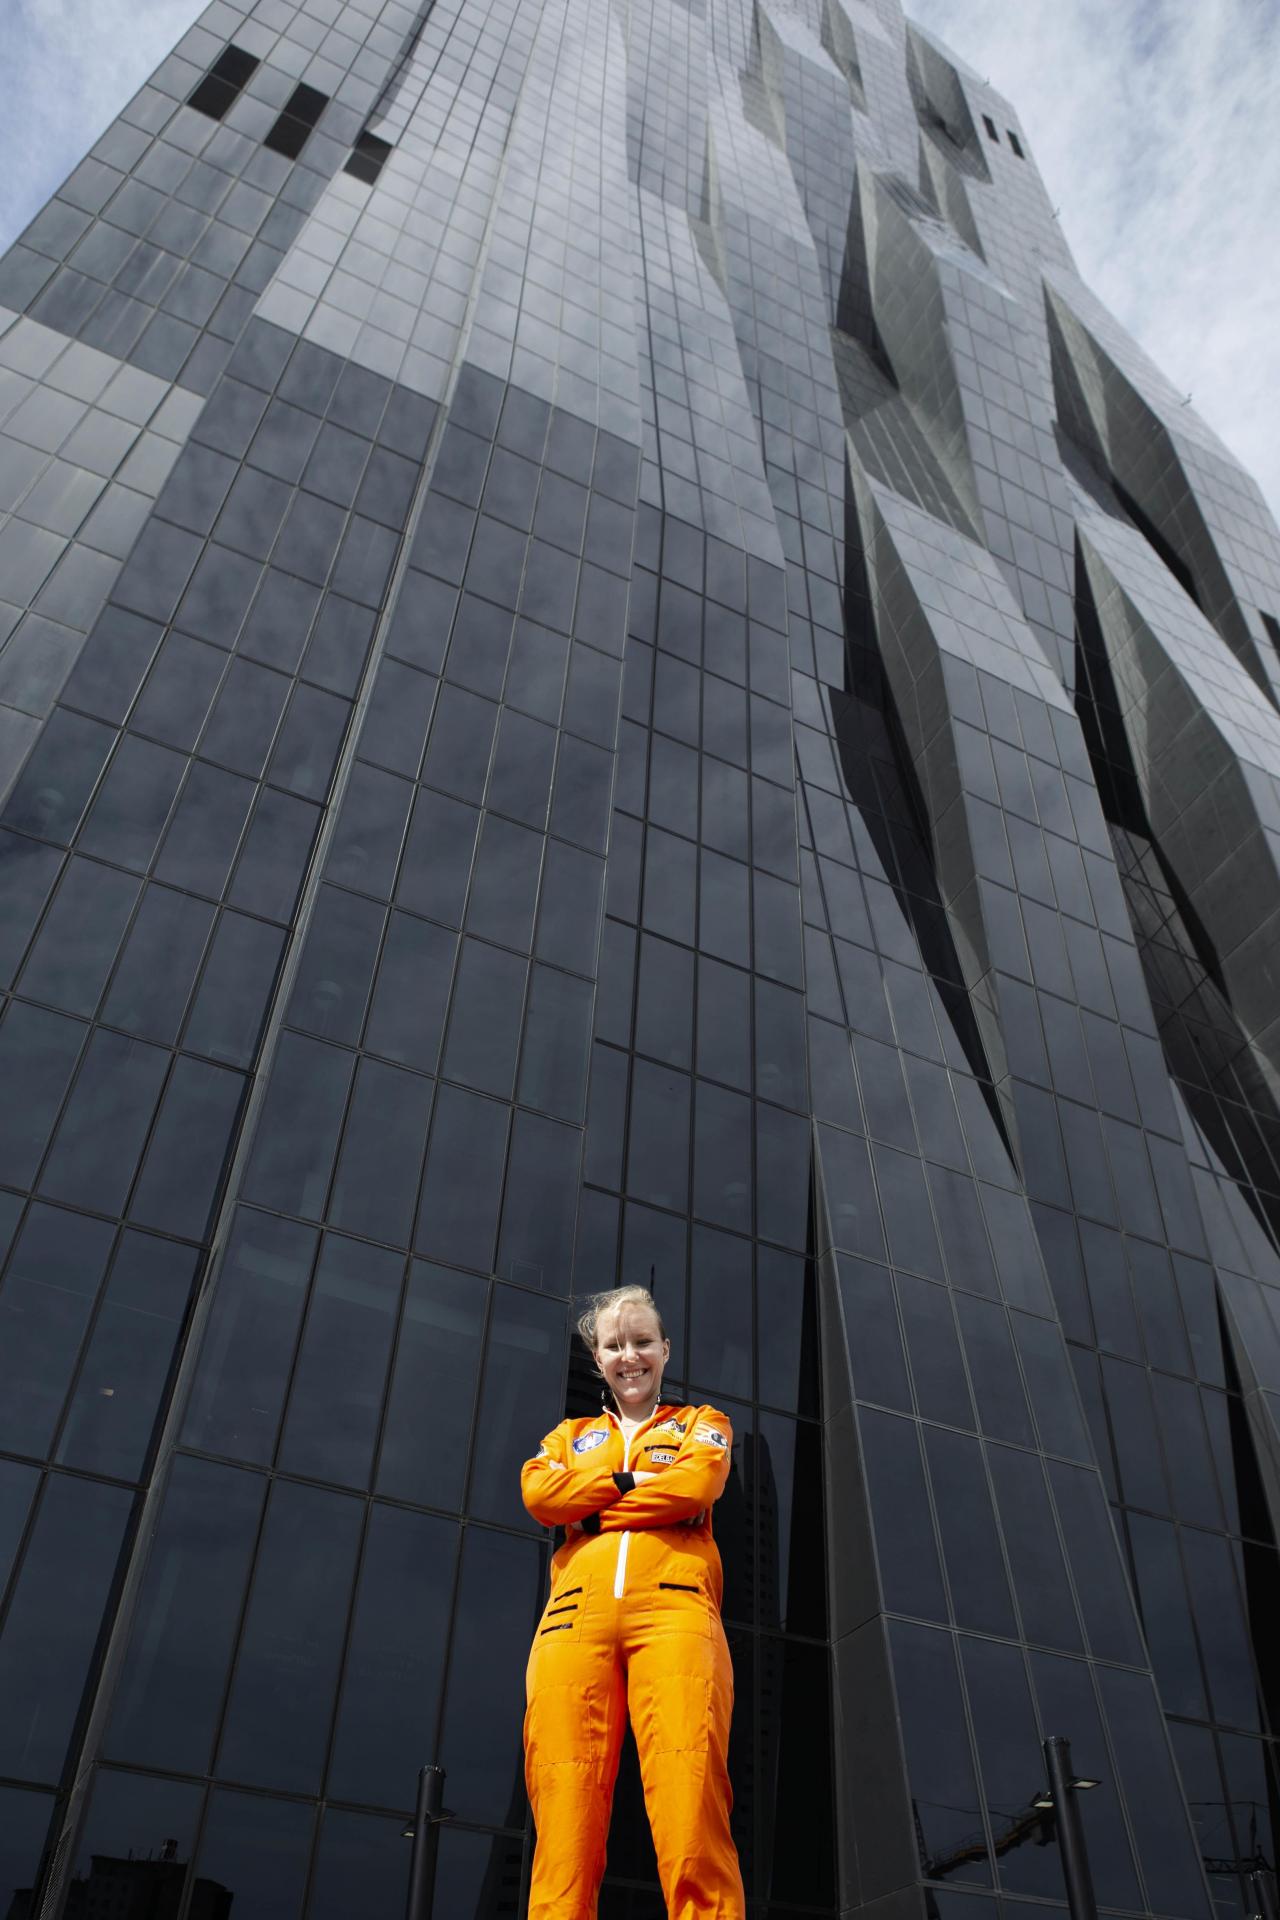 Raphaela Edelbauer in an orange space suit in front of a glass skyscraper.